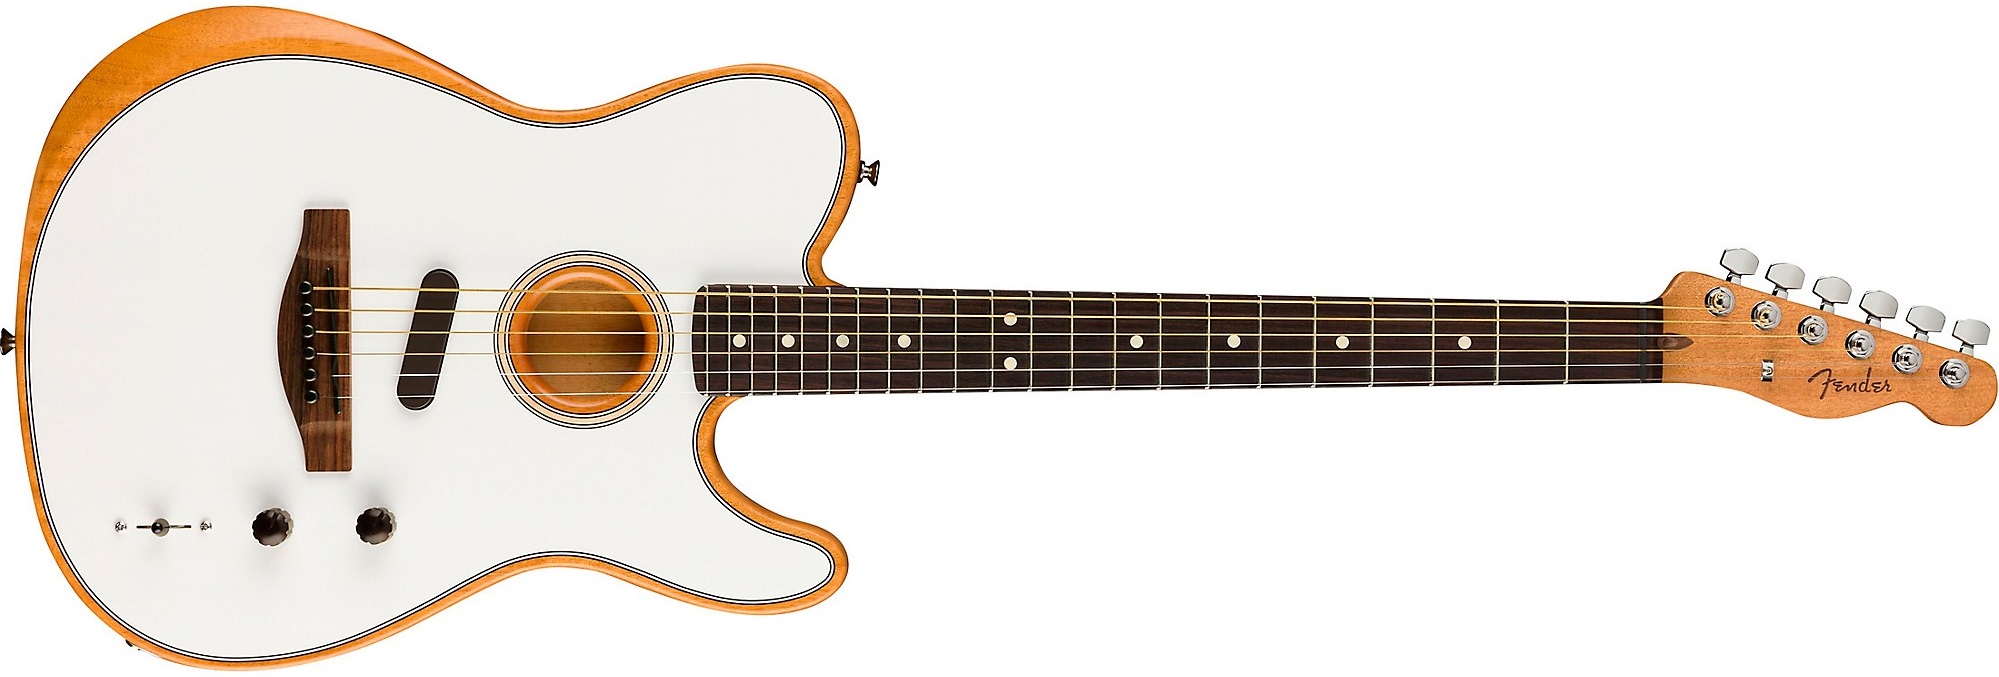 Fender Acoustasonic Player Telecaster Acoustic-Electric Guitar on a white background